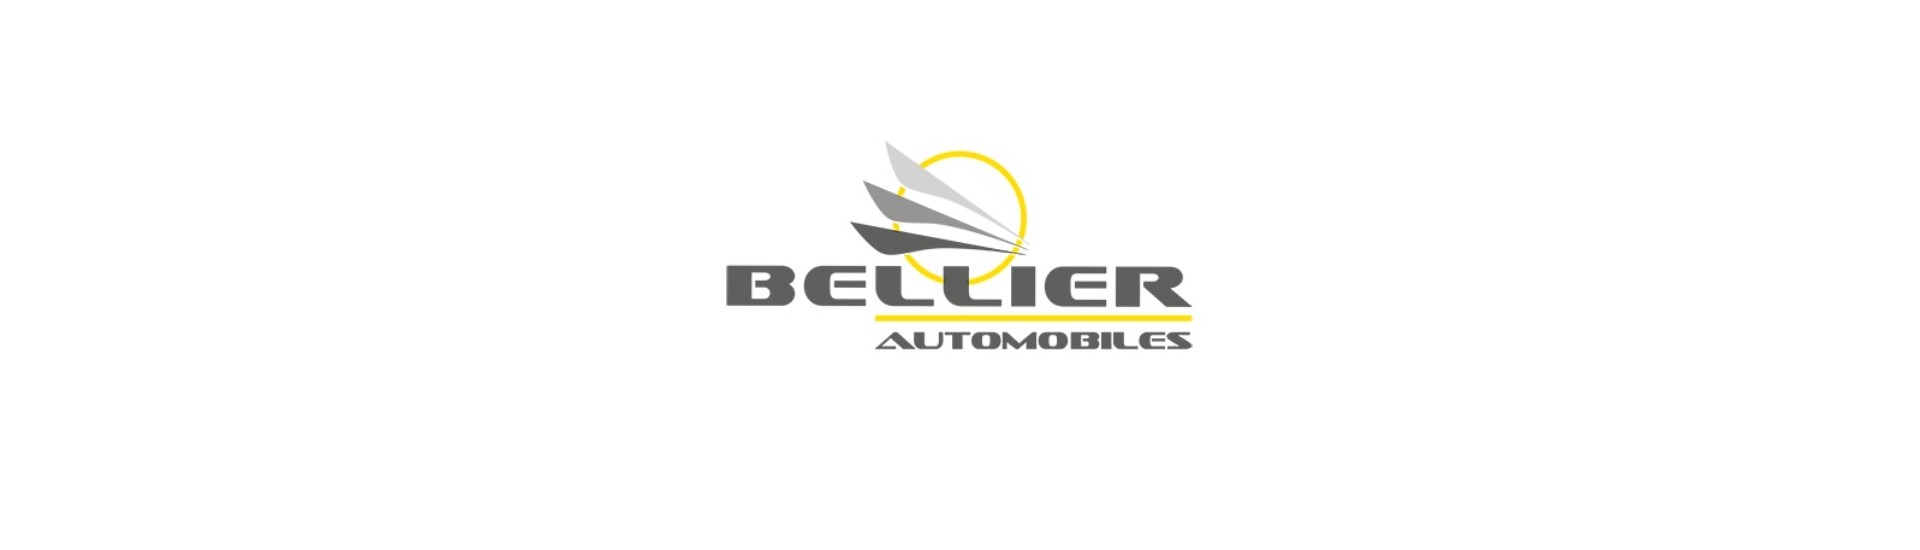 Fuel gauge at the best price for car without a permit Bellier